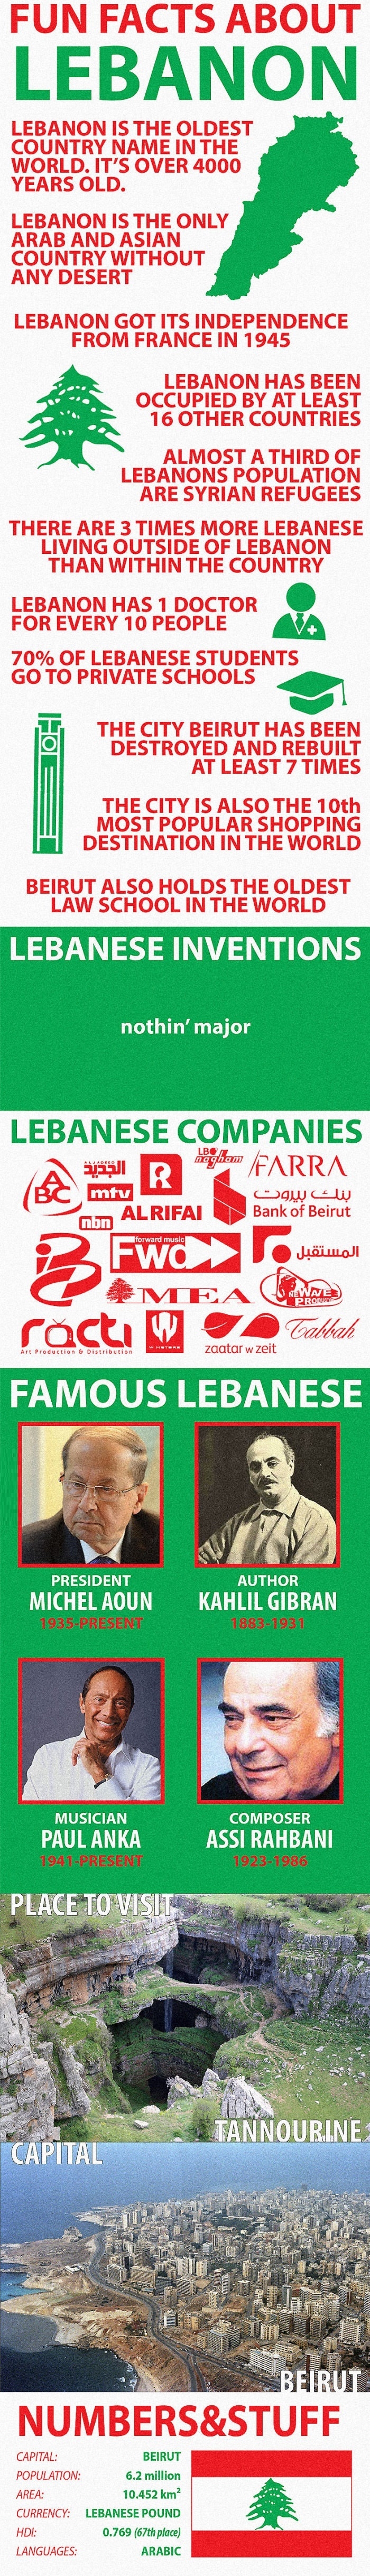 Facts about Lebanon